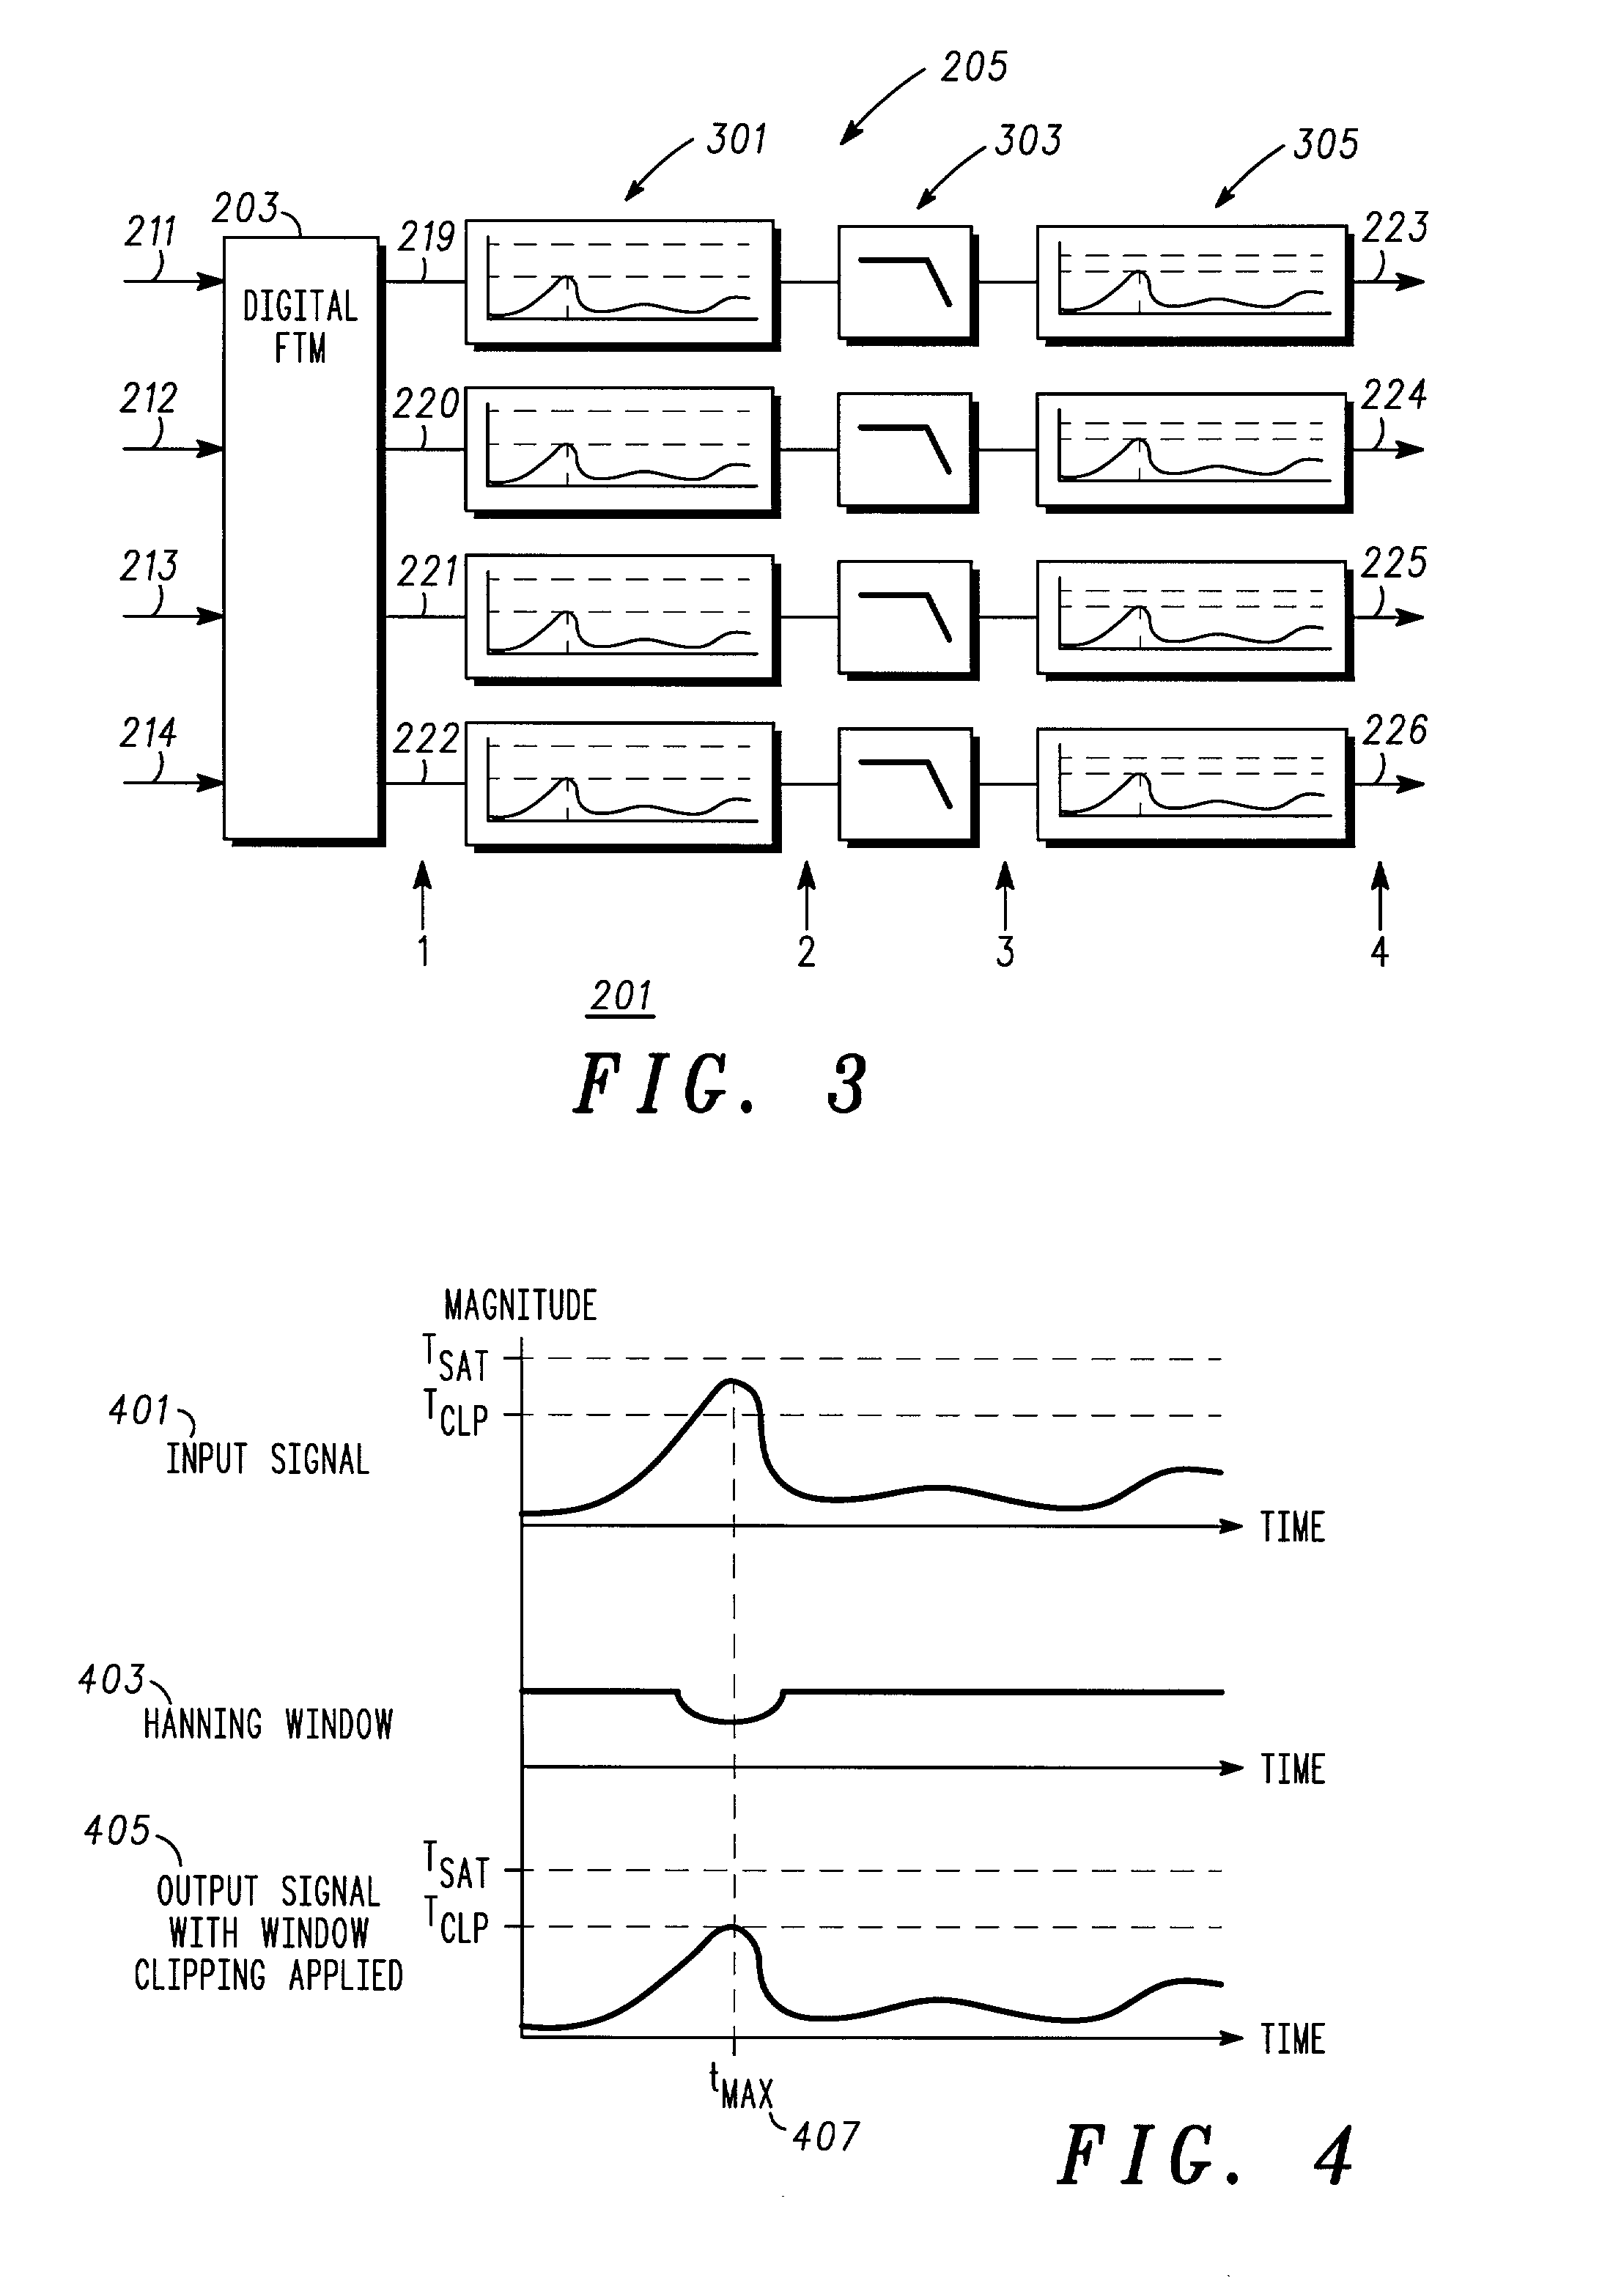 Method and apparatus for reducing transmitter peak power requirements